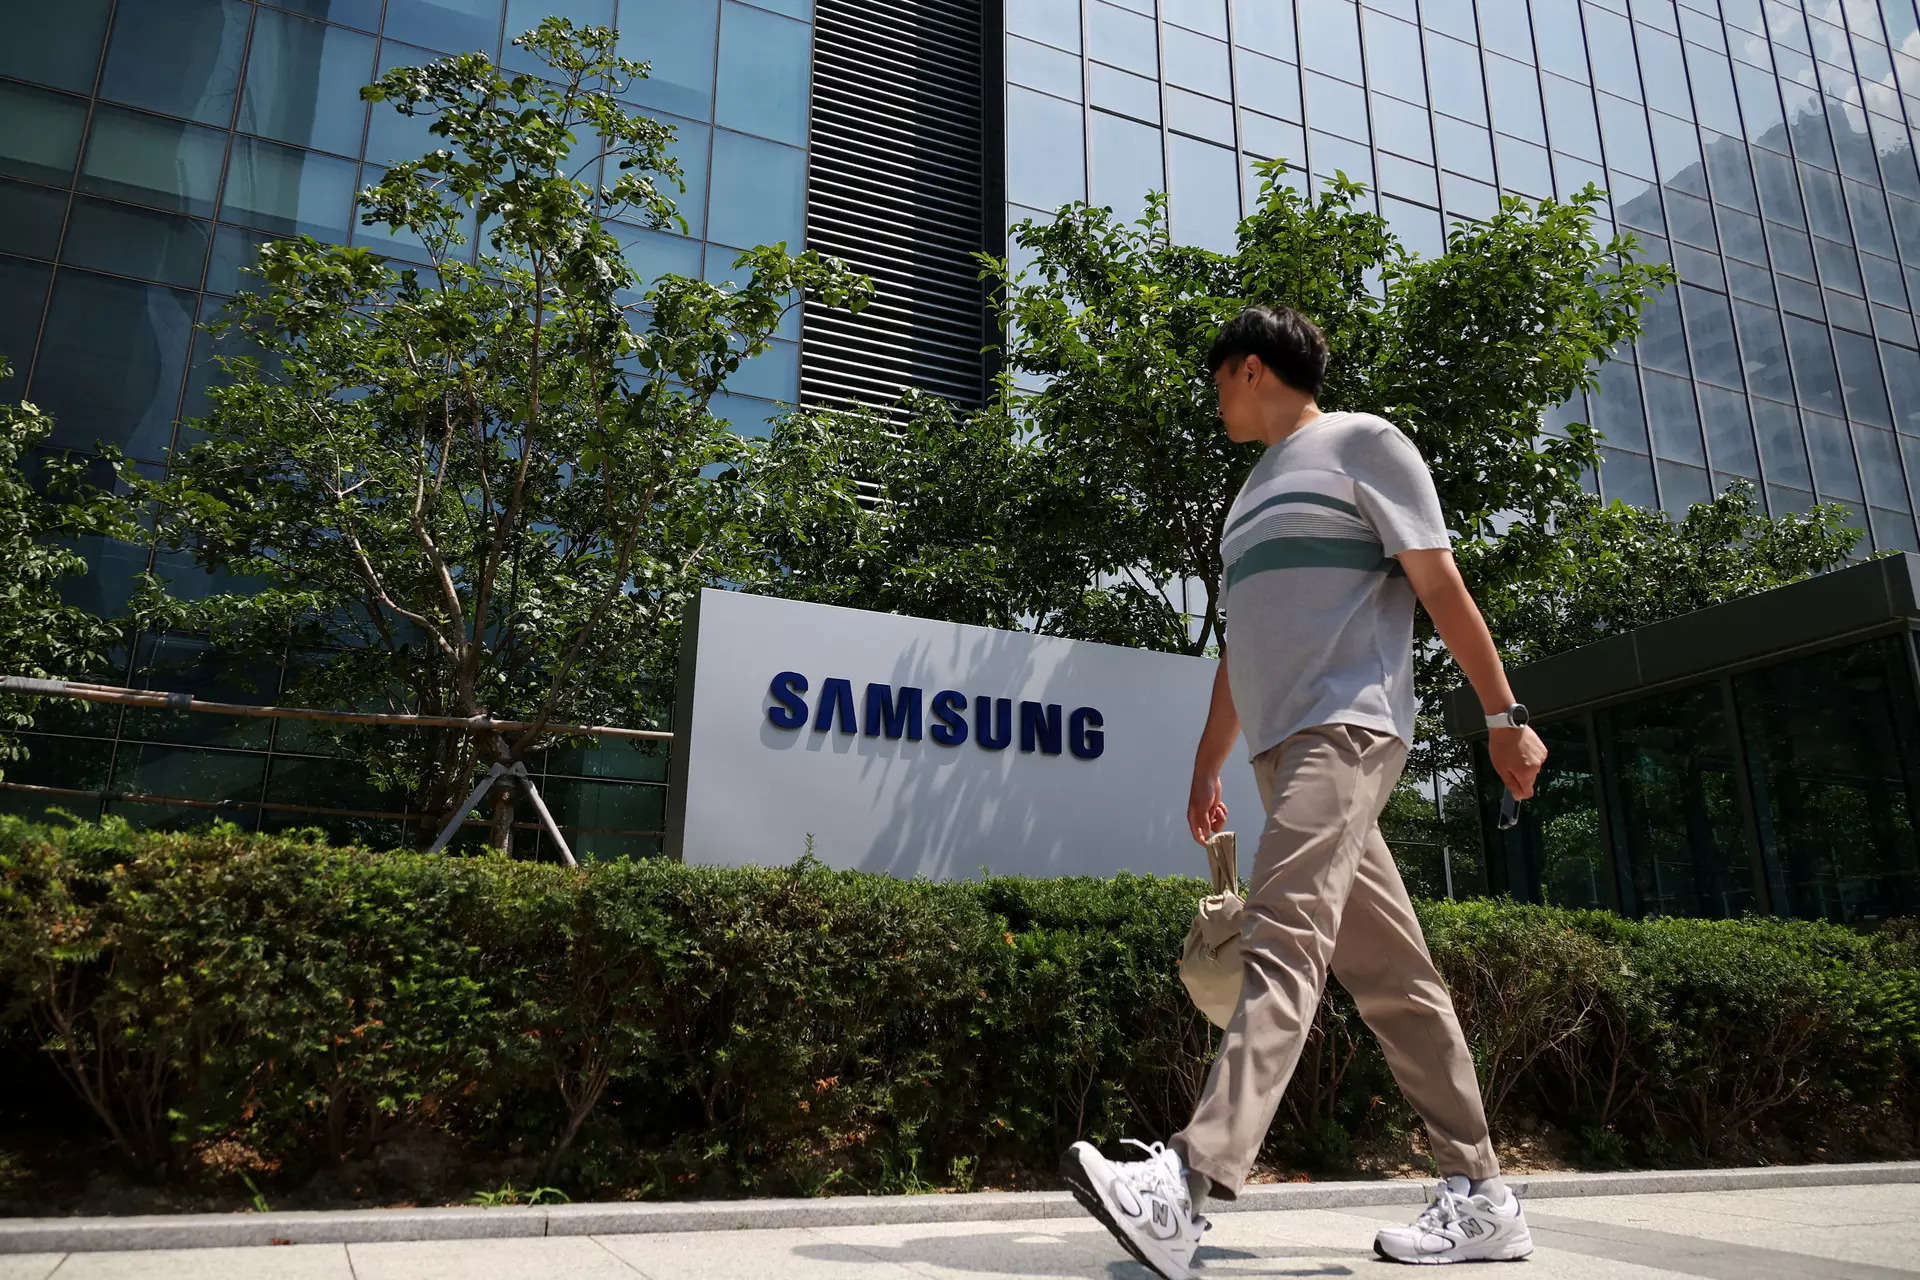 Samsung Electronics workers to strike on July 8-10, union says 